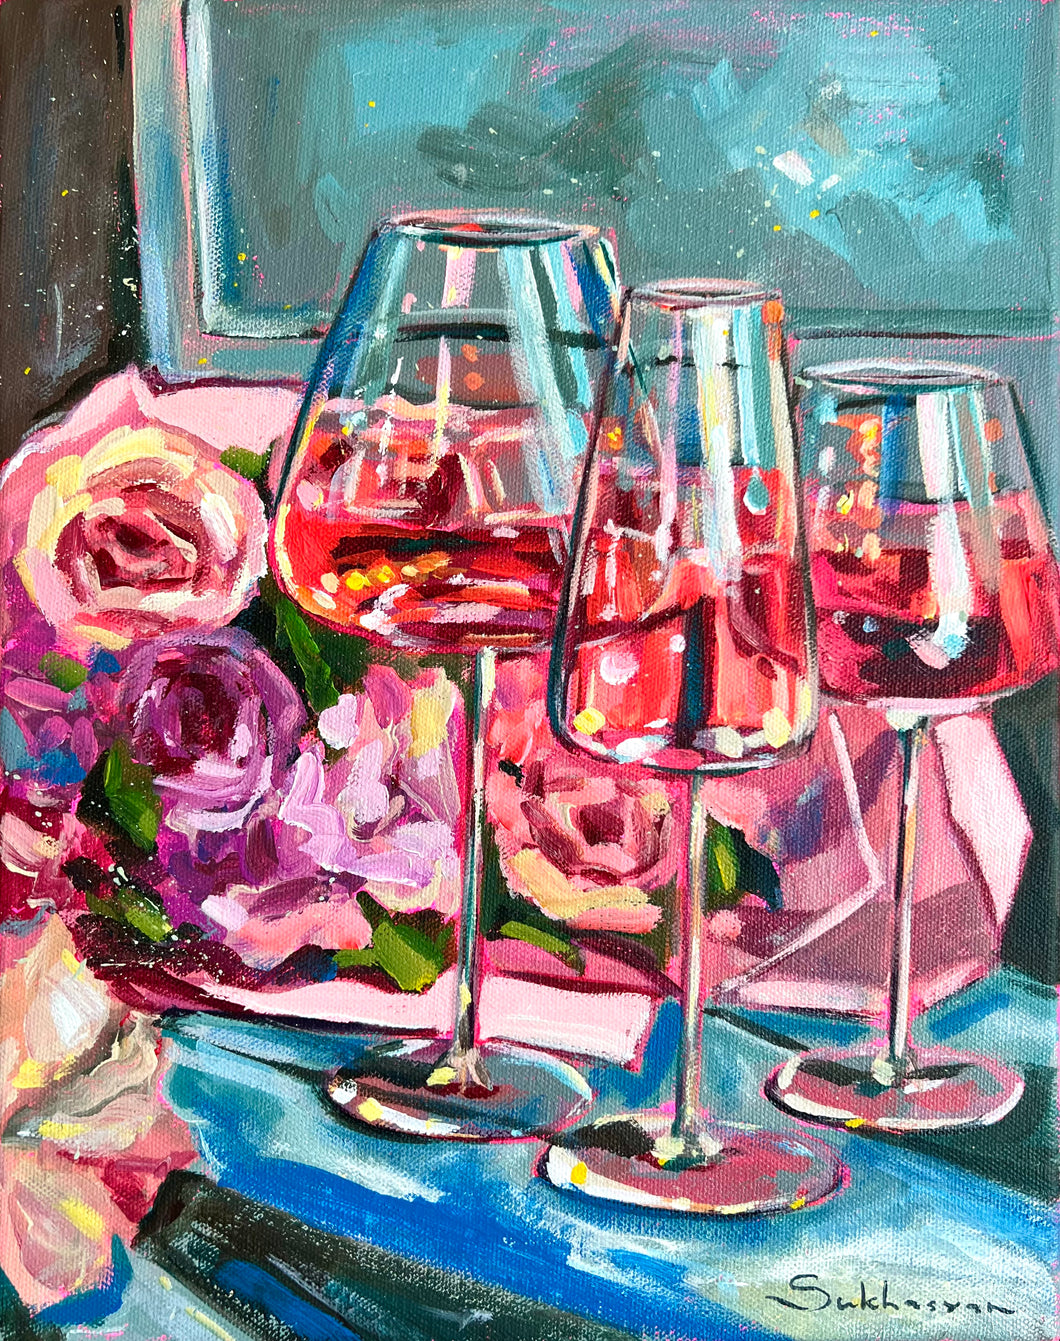 Archival giclée print of the of Original acrylic painting Still Life with Rosé Wine and Flowers by Victoria Sukhasyan